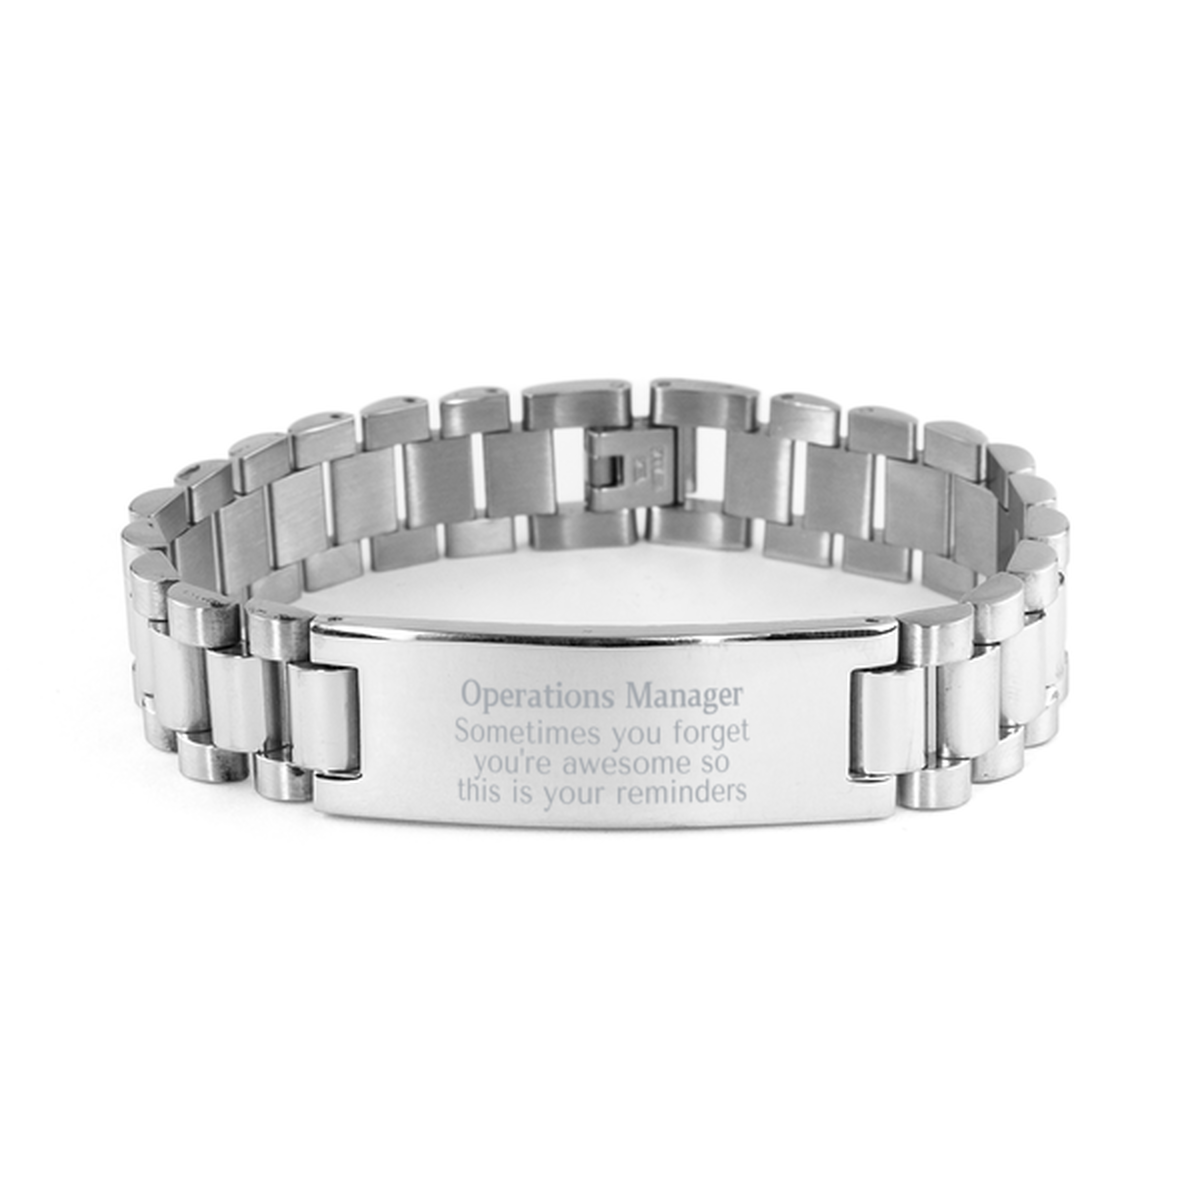 Sentimental Operations Manager Ladder Stainless Steel Bracelet, Operations Manager Sometimes you forget you're awesome so this is your reminders, Graduation Christmas Birthday Gifts for Operations Manager, Men, Women, Coworkers